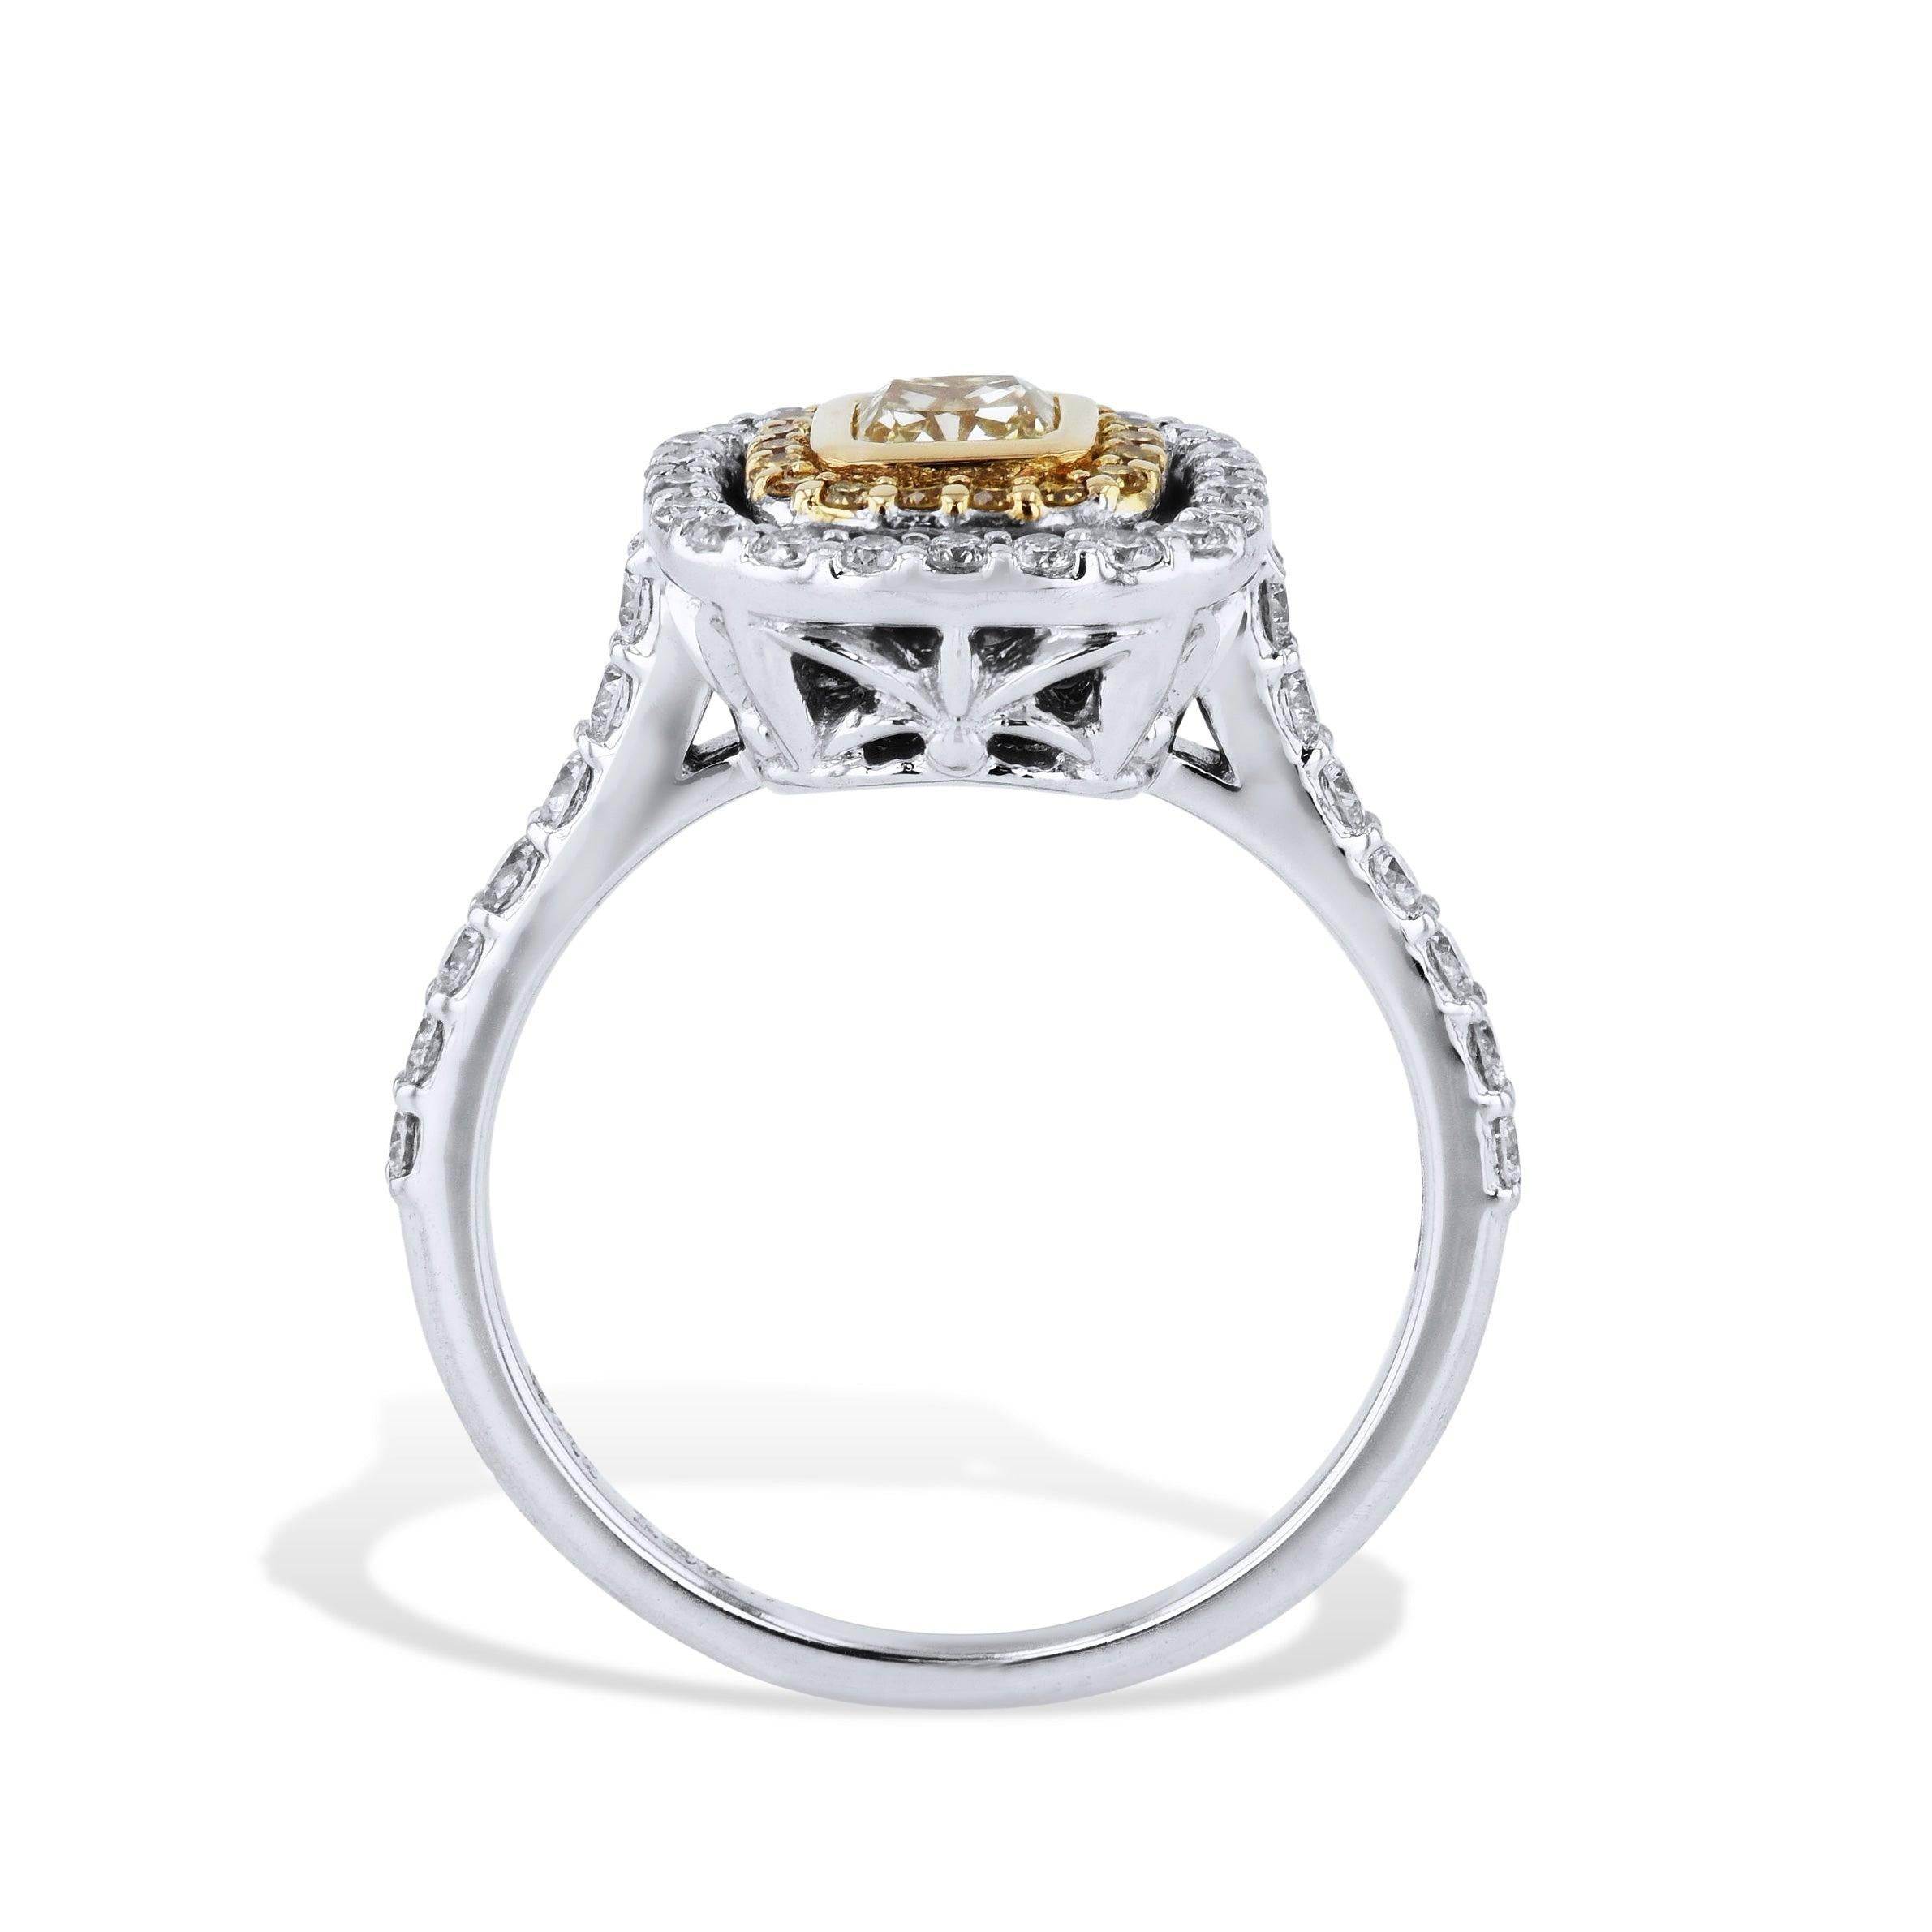 Indulge in this extraordinary Fancy Yellow Diamond and Pave Estate Engagement Ring crafted in 18kt white and yellow gold. Adorned with a radiant cut Fancy Yellow Diamond and alluring diamond pave. This masterpiece from the Estate and Vintage